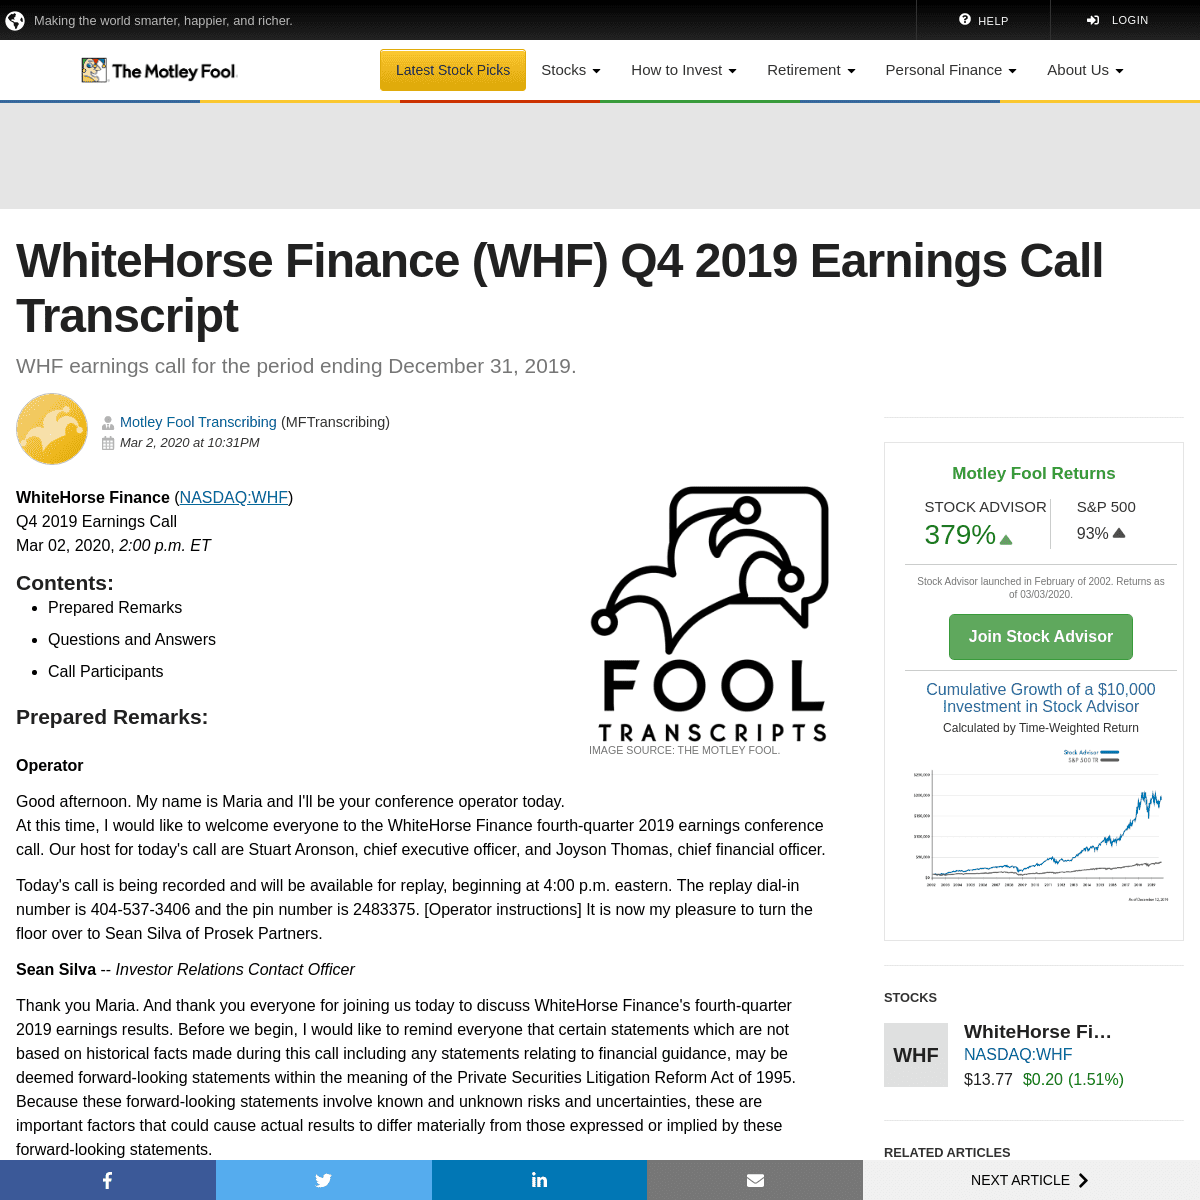 A complete backup of www.fool.com/earnings/call-transcripts/2020/03/02/whitehorse-finance-whf-q4-2019-earnings-call-trans.aspx